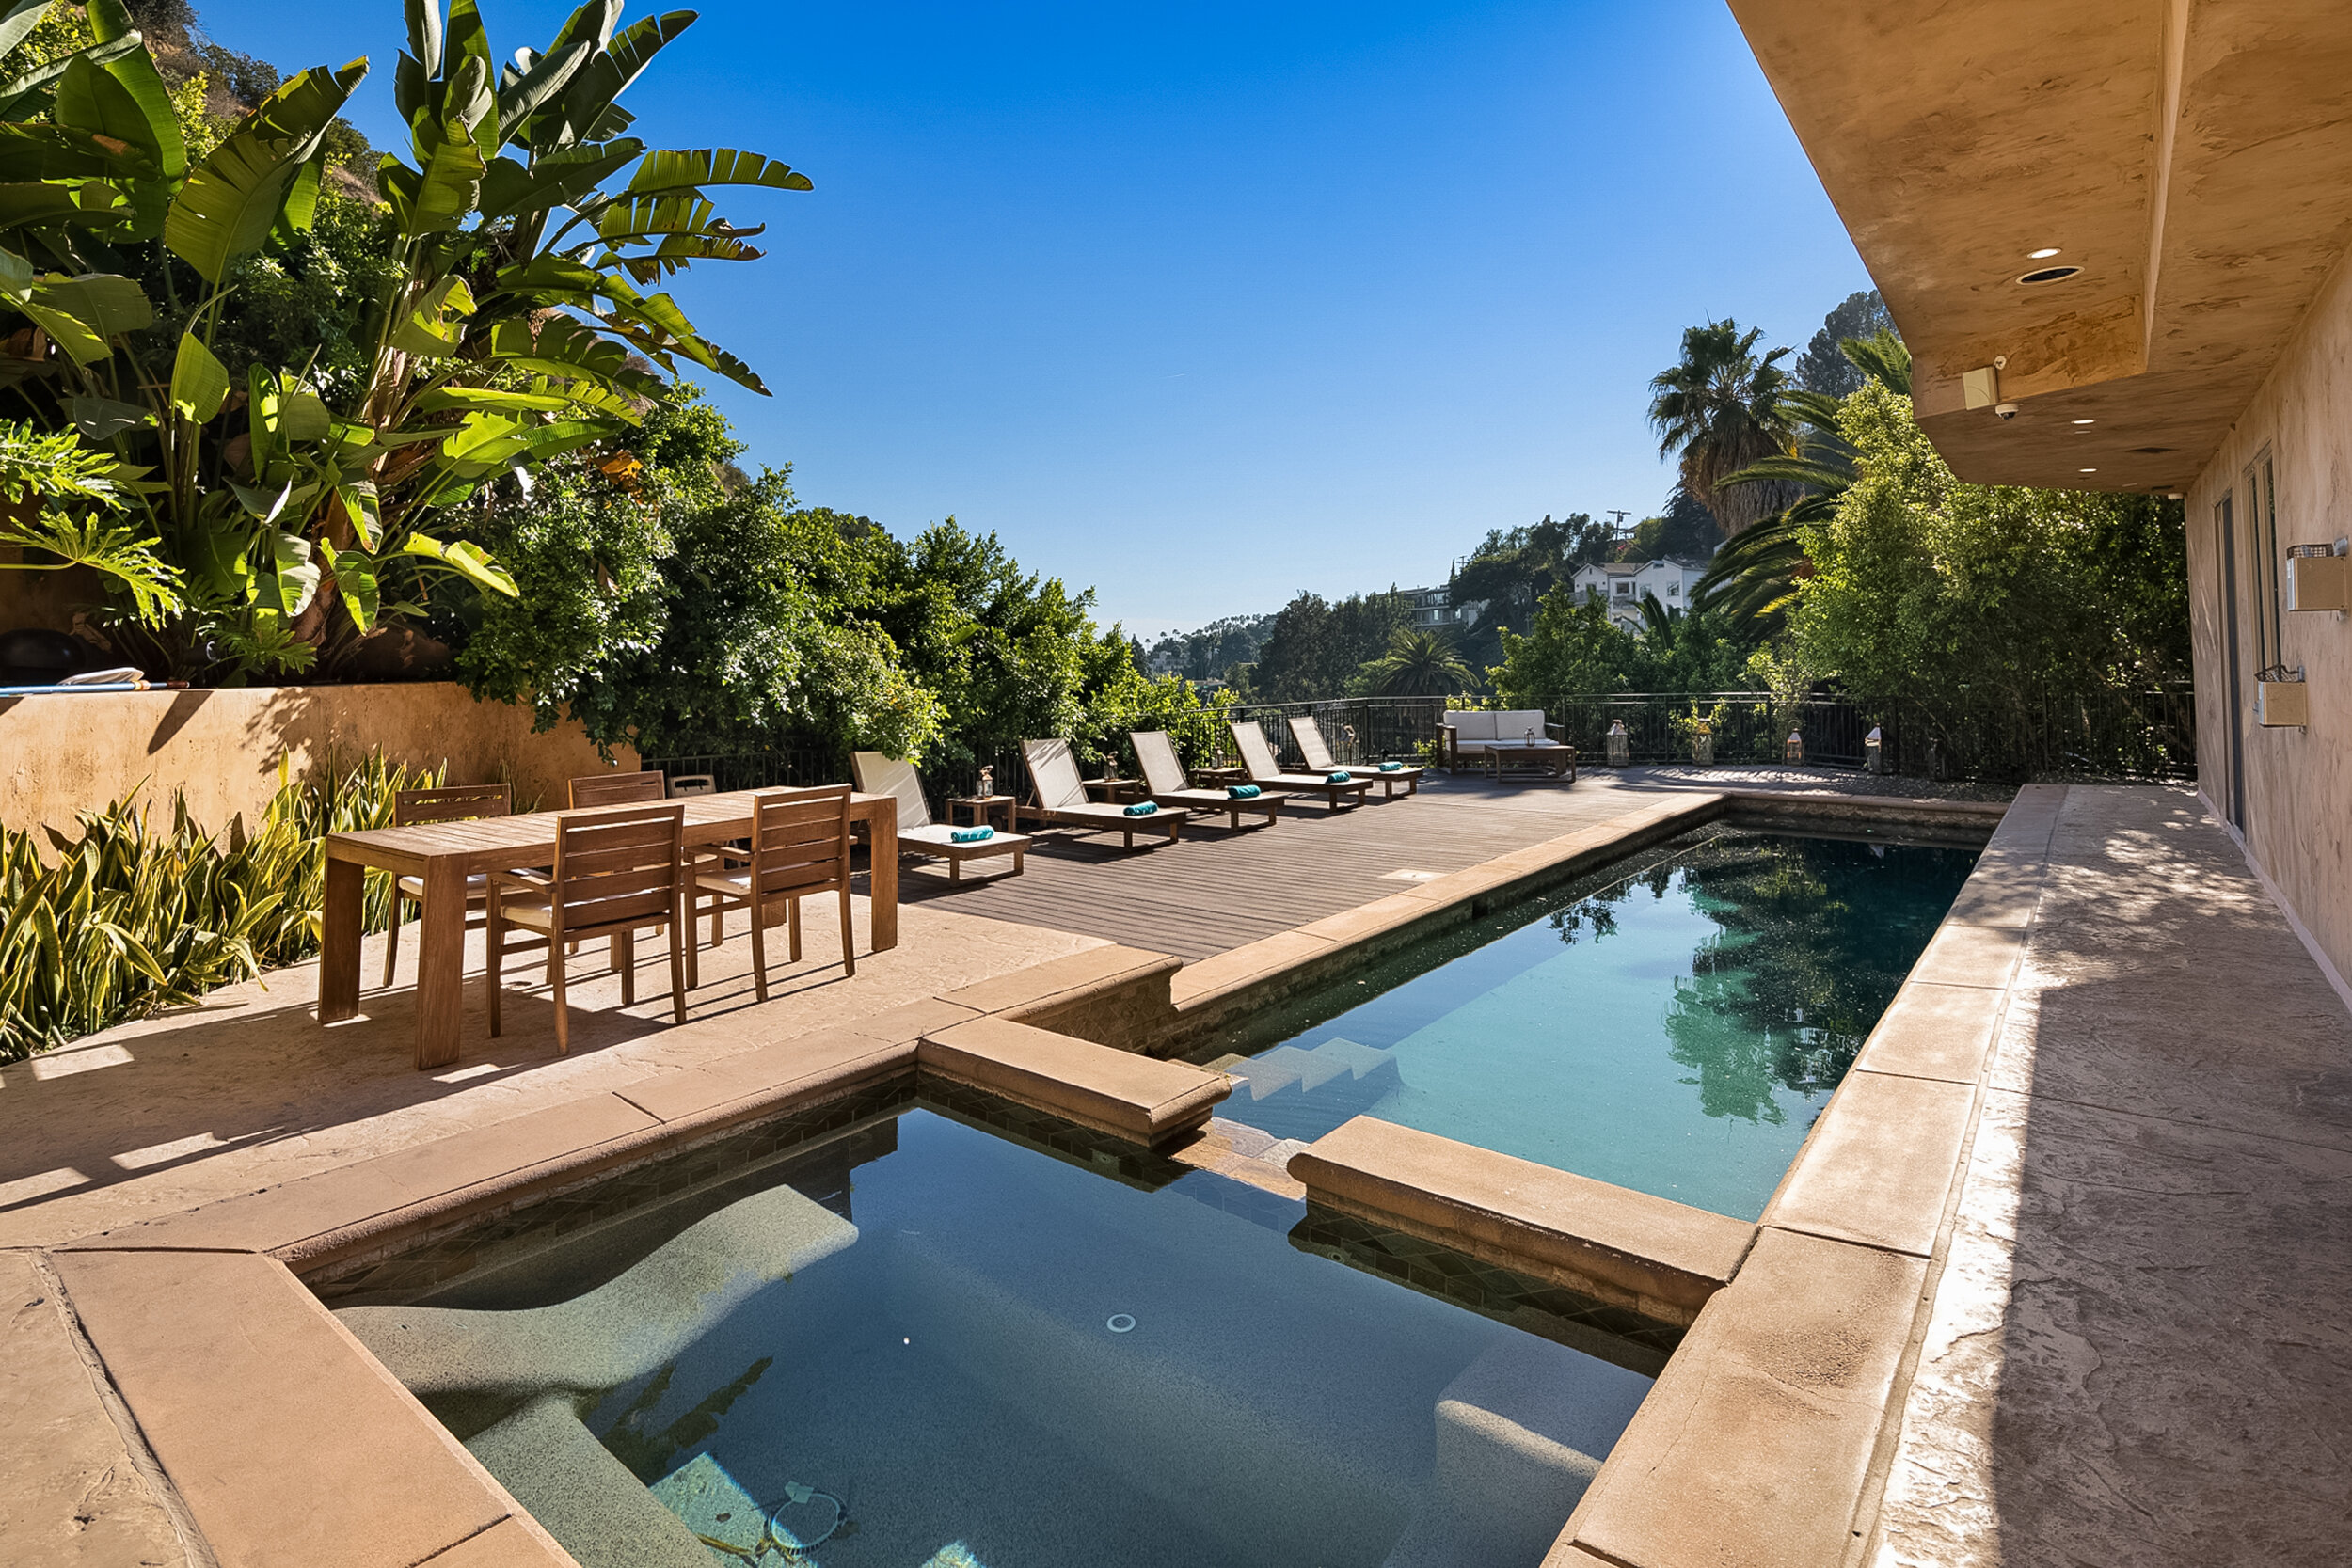 Deep Dell 2 - Hollywood Hills, 7BR, 8BA, 6597 Sq-ft, Spanish Style, Game Room, Theater, Rooftop Deck, Pool, Spa, View-69.jpg